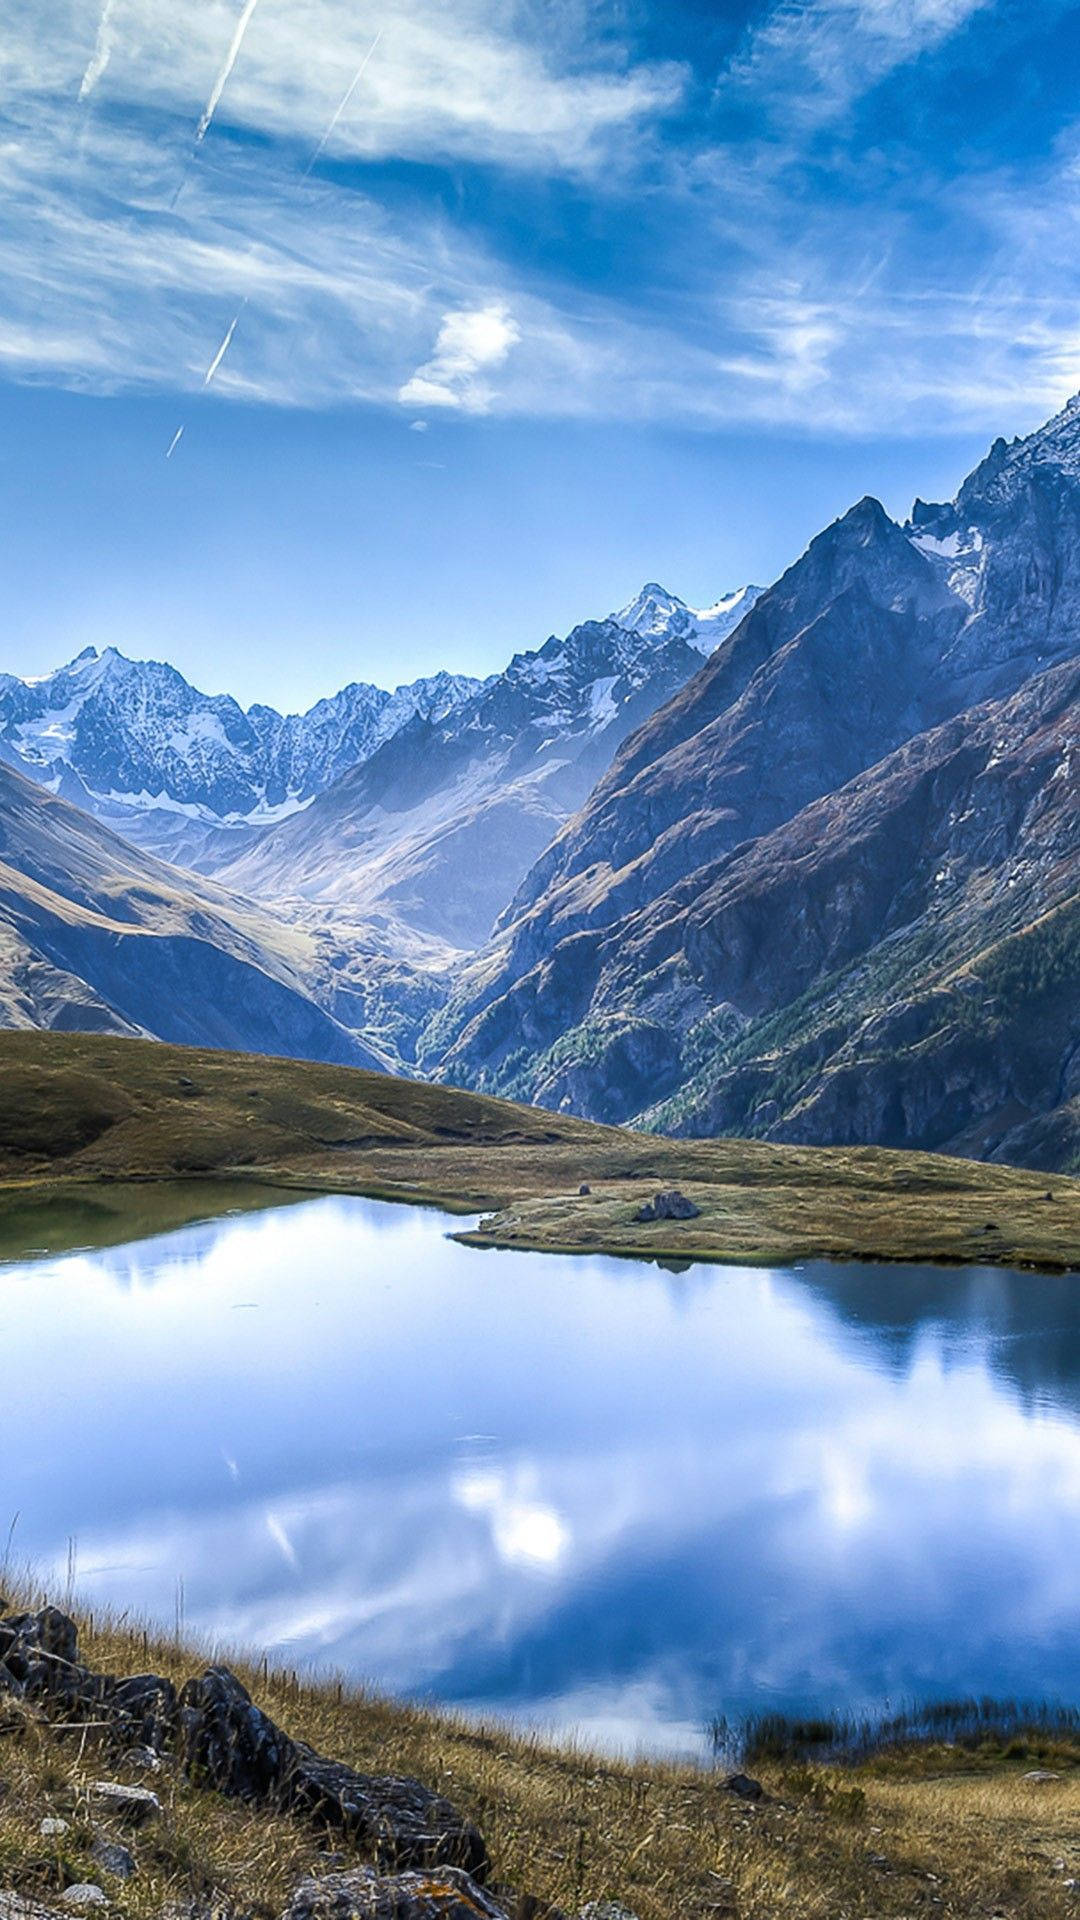 Download Full Hd Mountains By Lake Android Wallpaper 